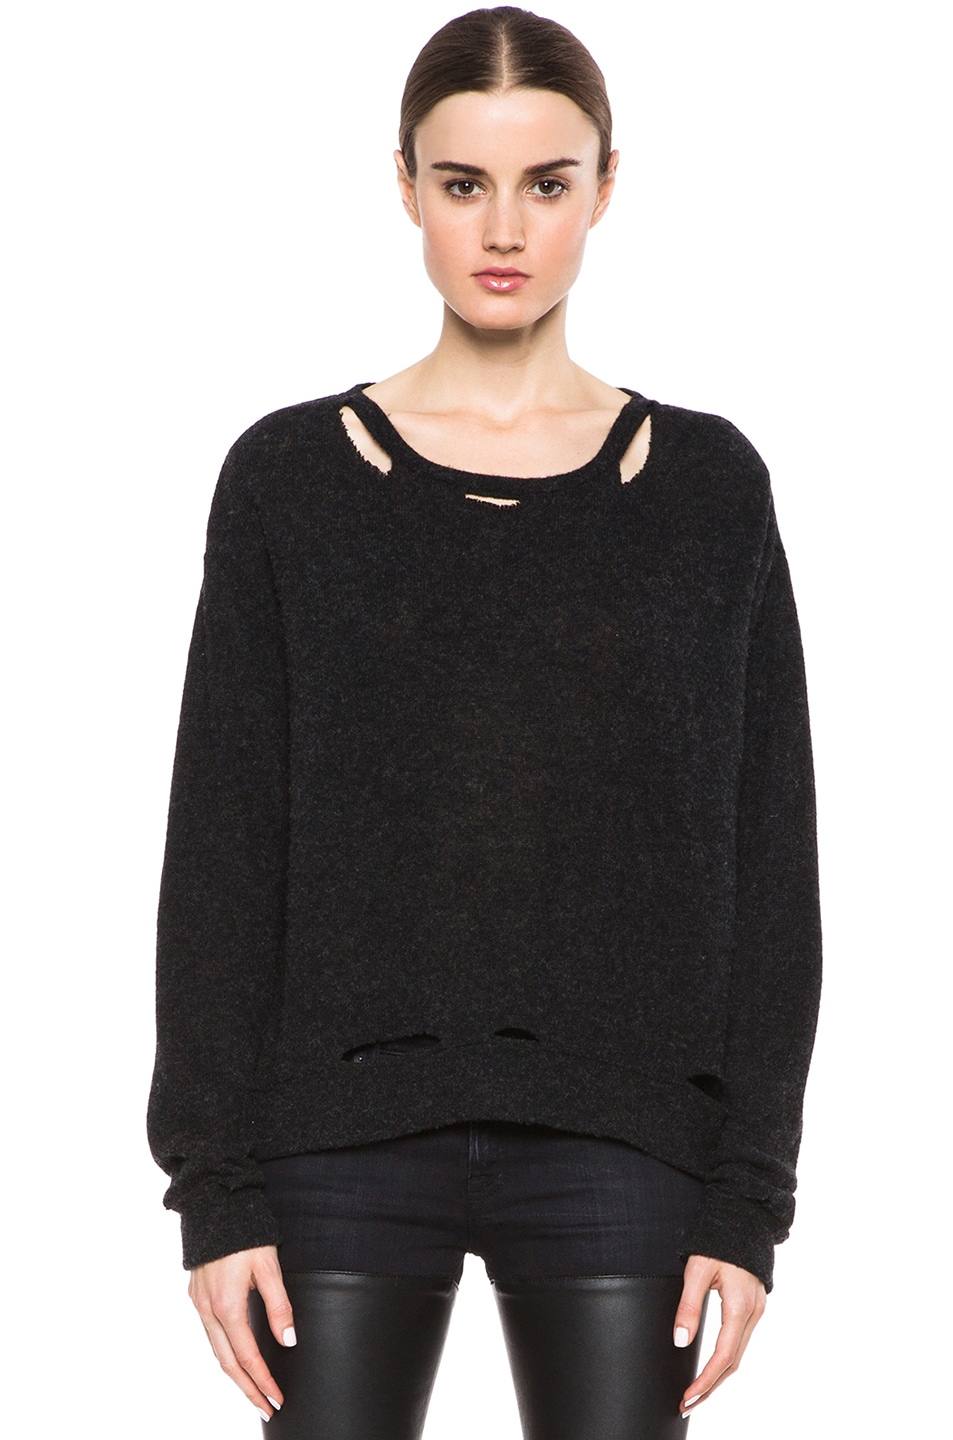 R13 Kate Wool-Blend Sweater with Holes in Black | FWRD